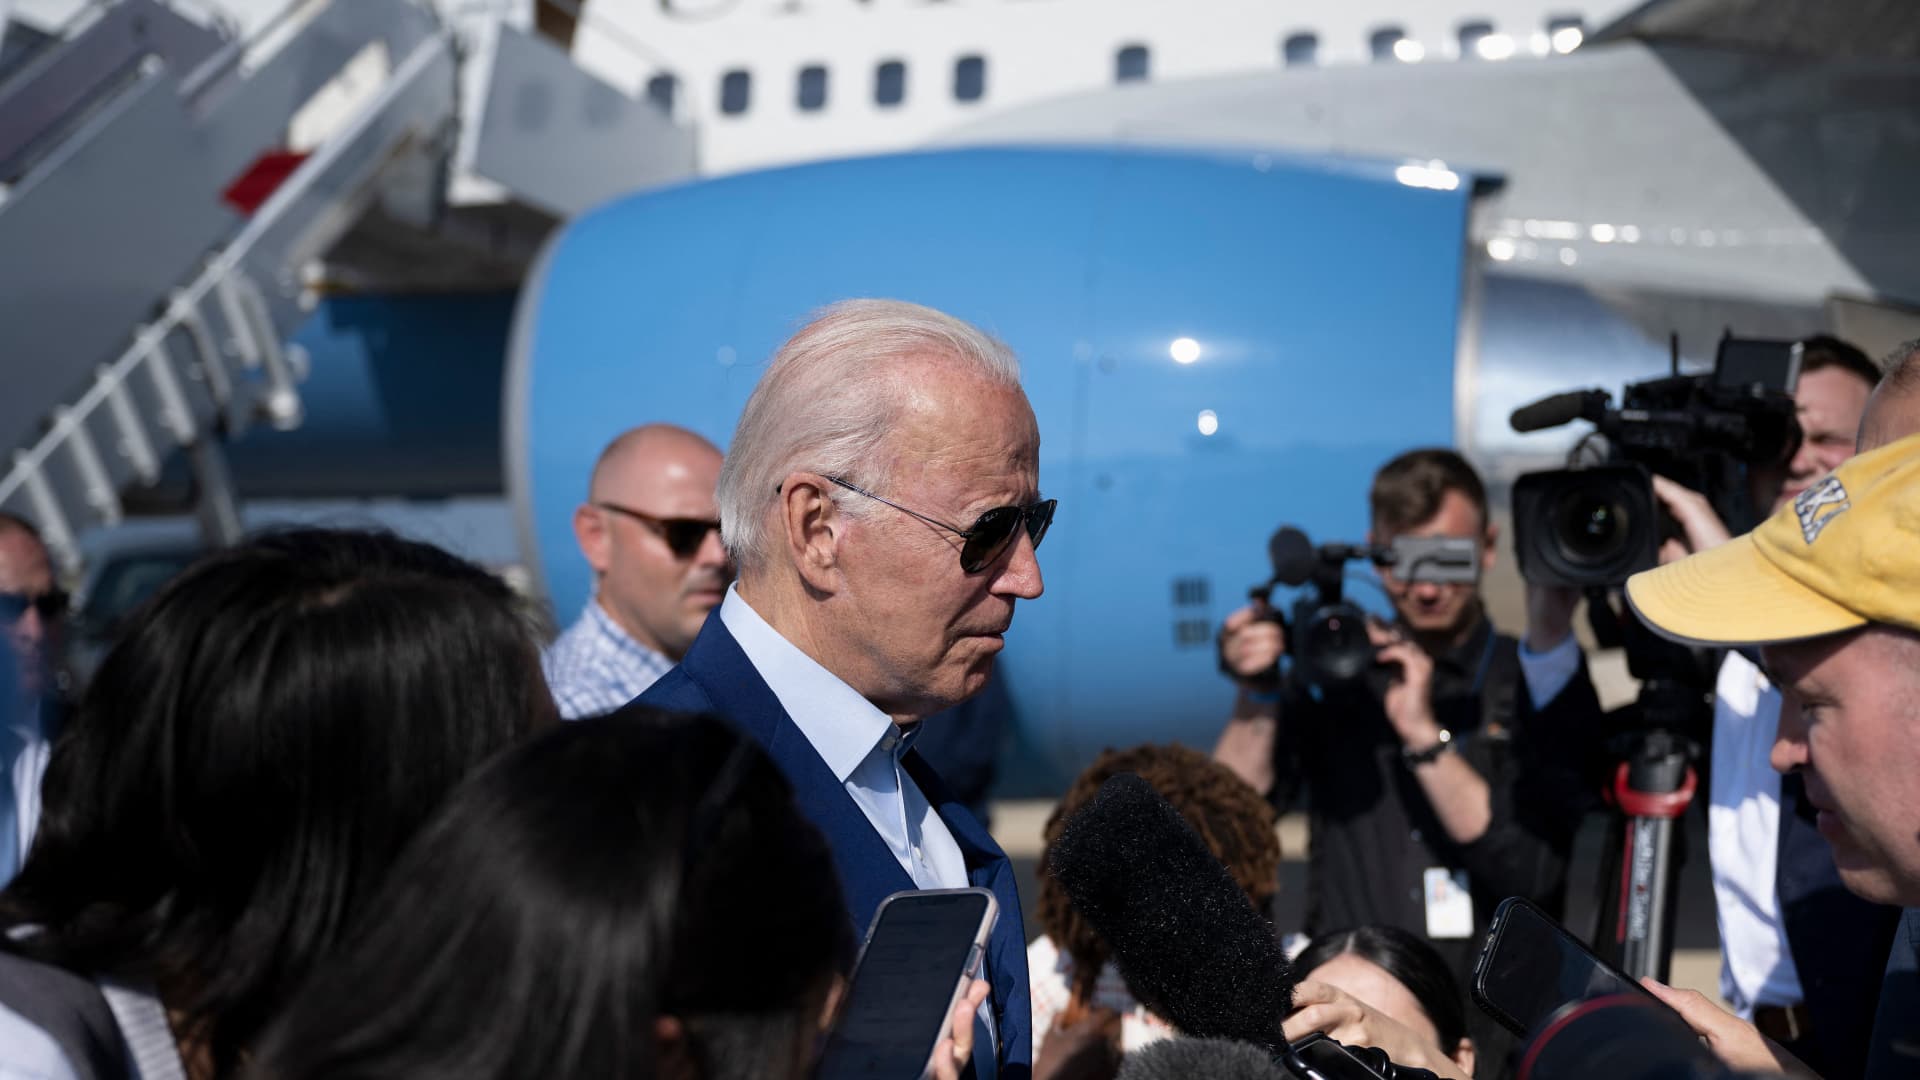 Biden says he expects to speak with China’s Xi in 10 days